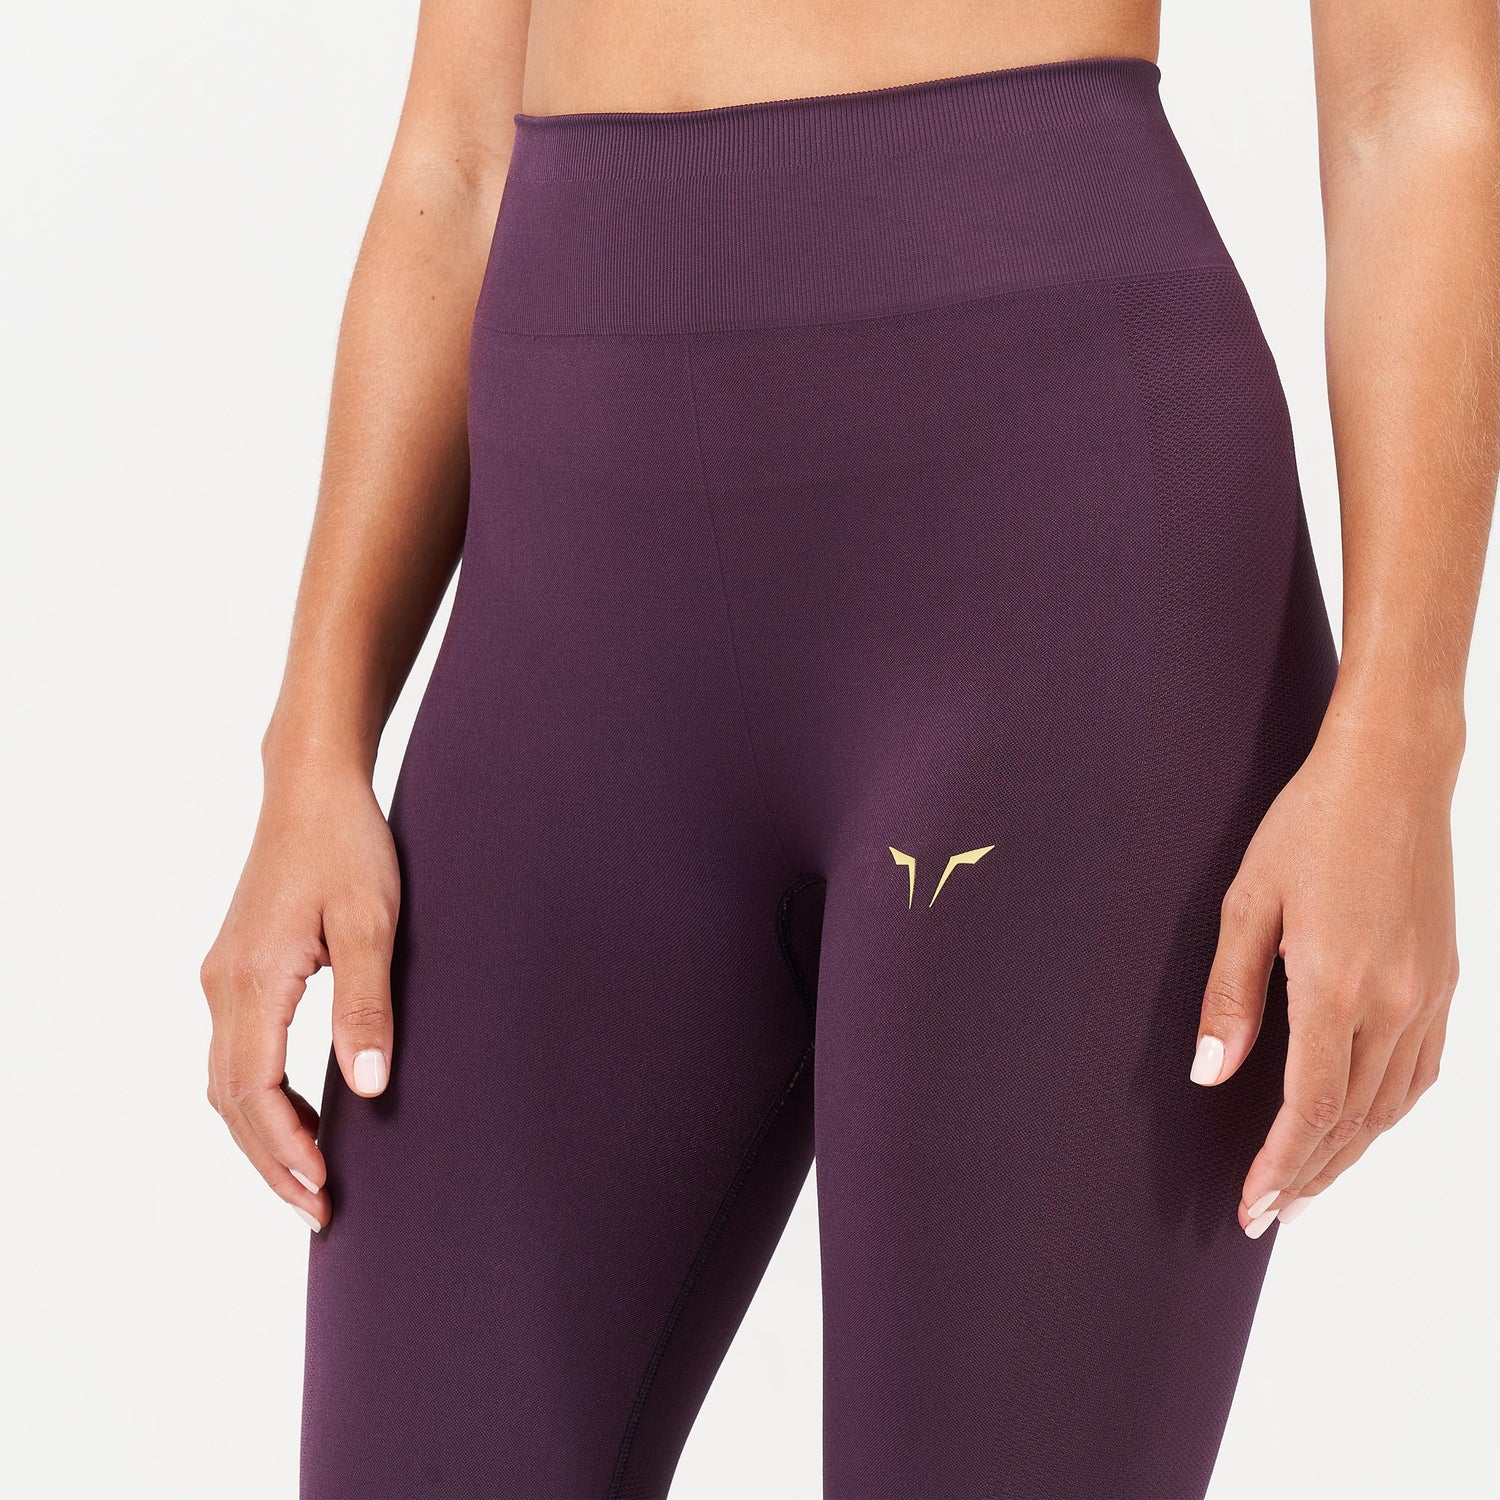 squatwolf-workout-clothes-lab360-seamless-cuffed-leggings-plum-perfect-gym-leggings-for-women